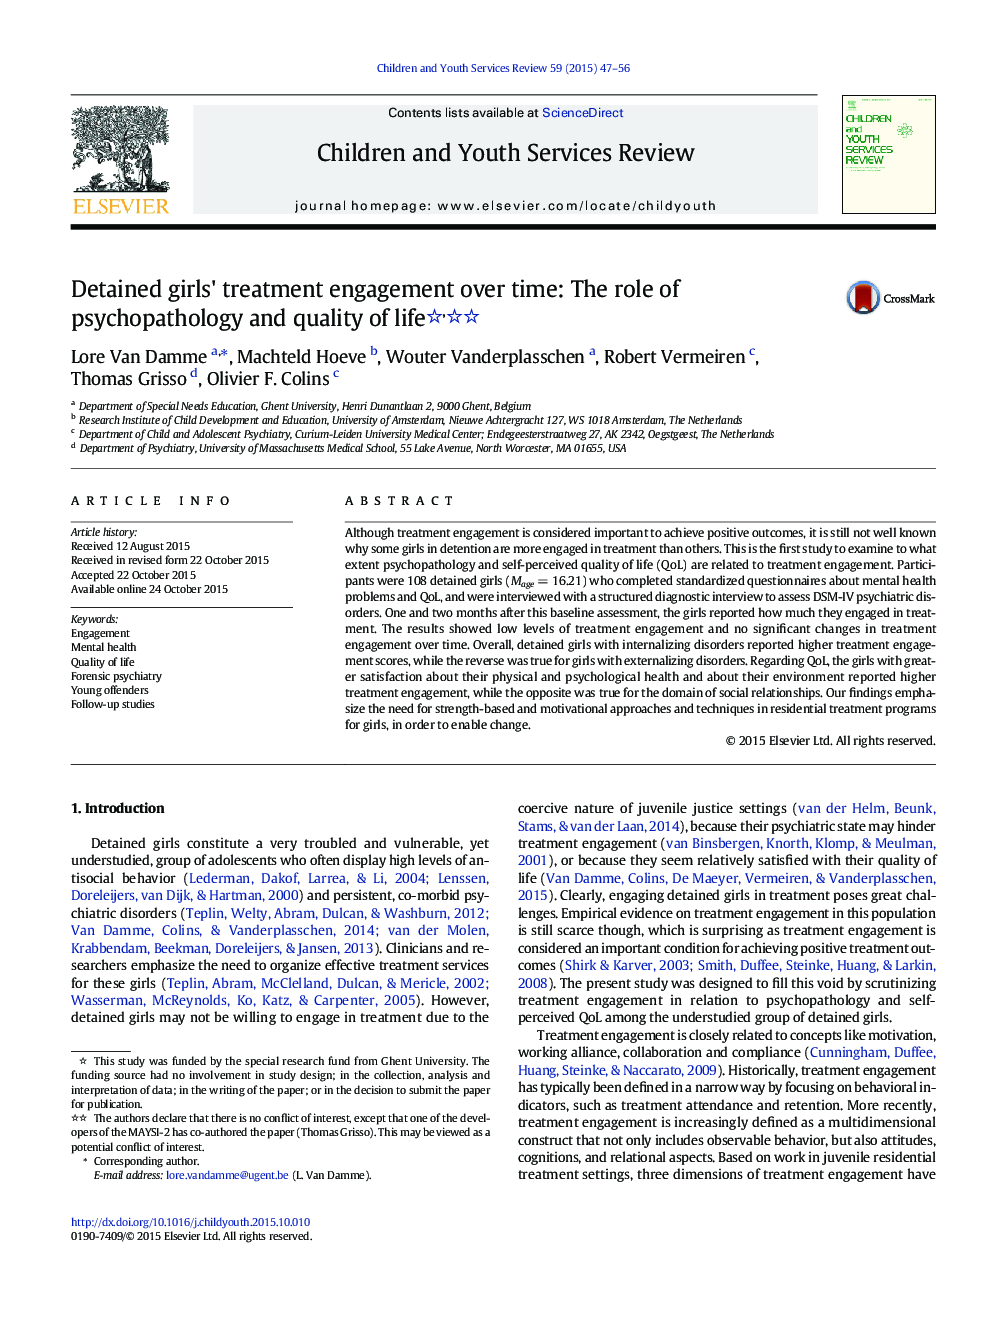 Detained girls' treatment engagement over time: The role of psychopathology and quality of life